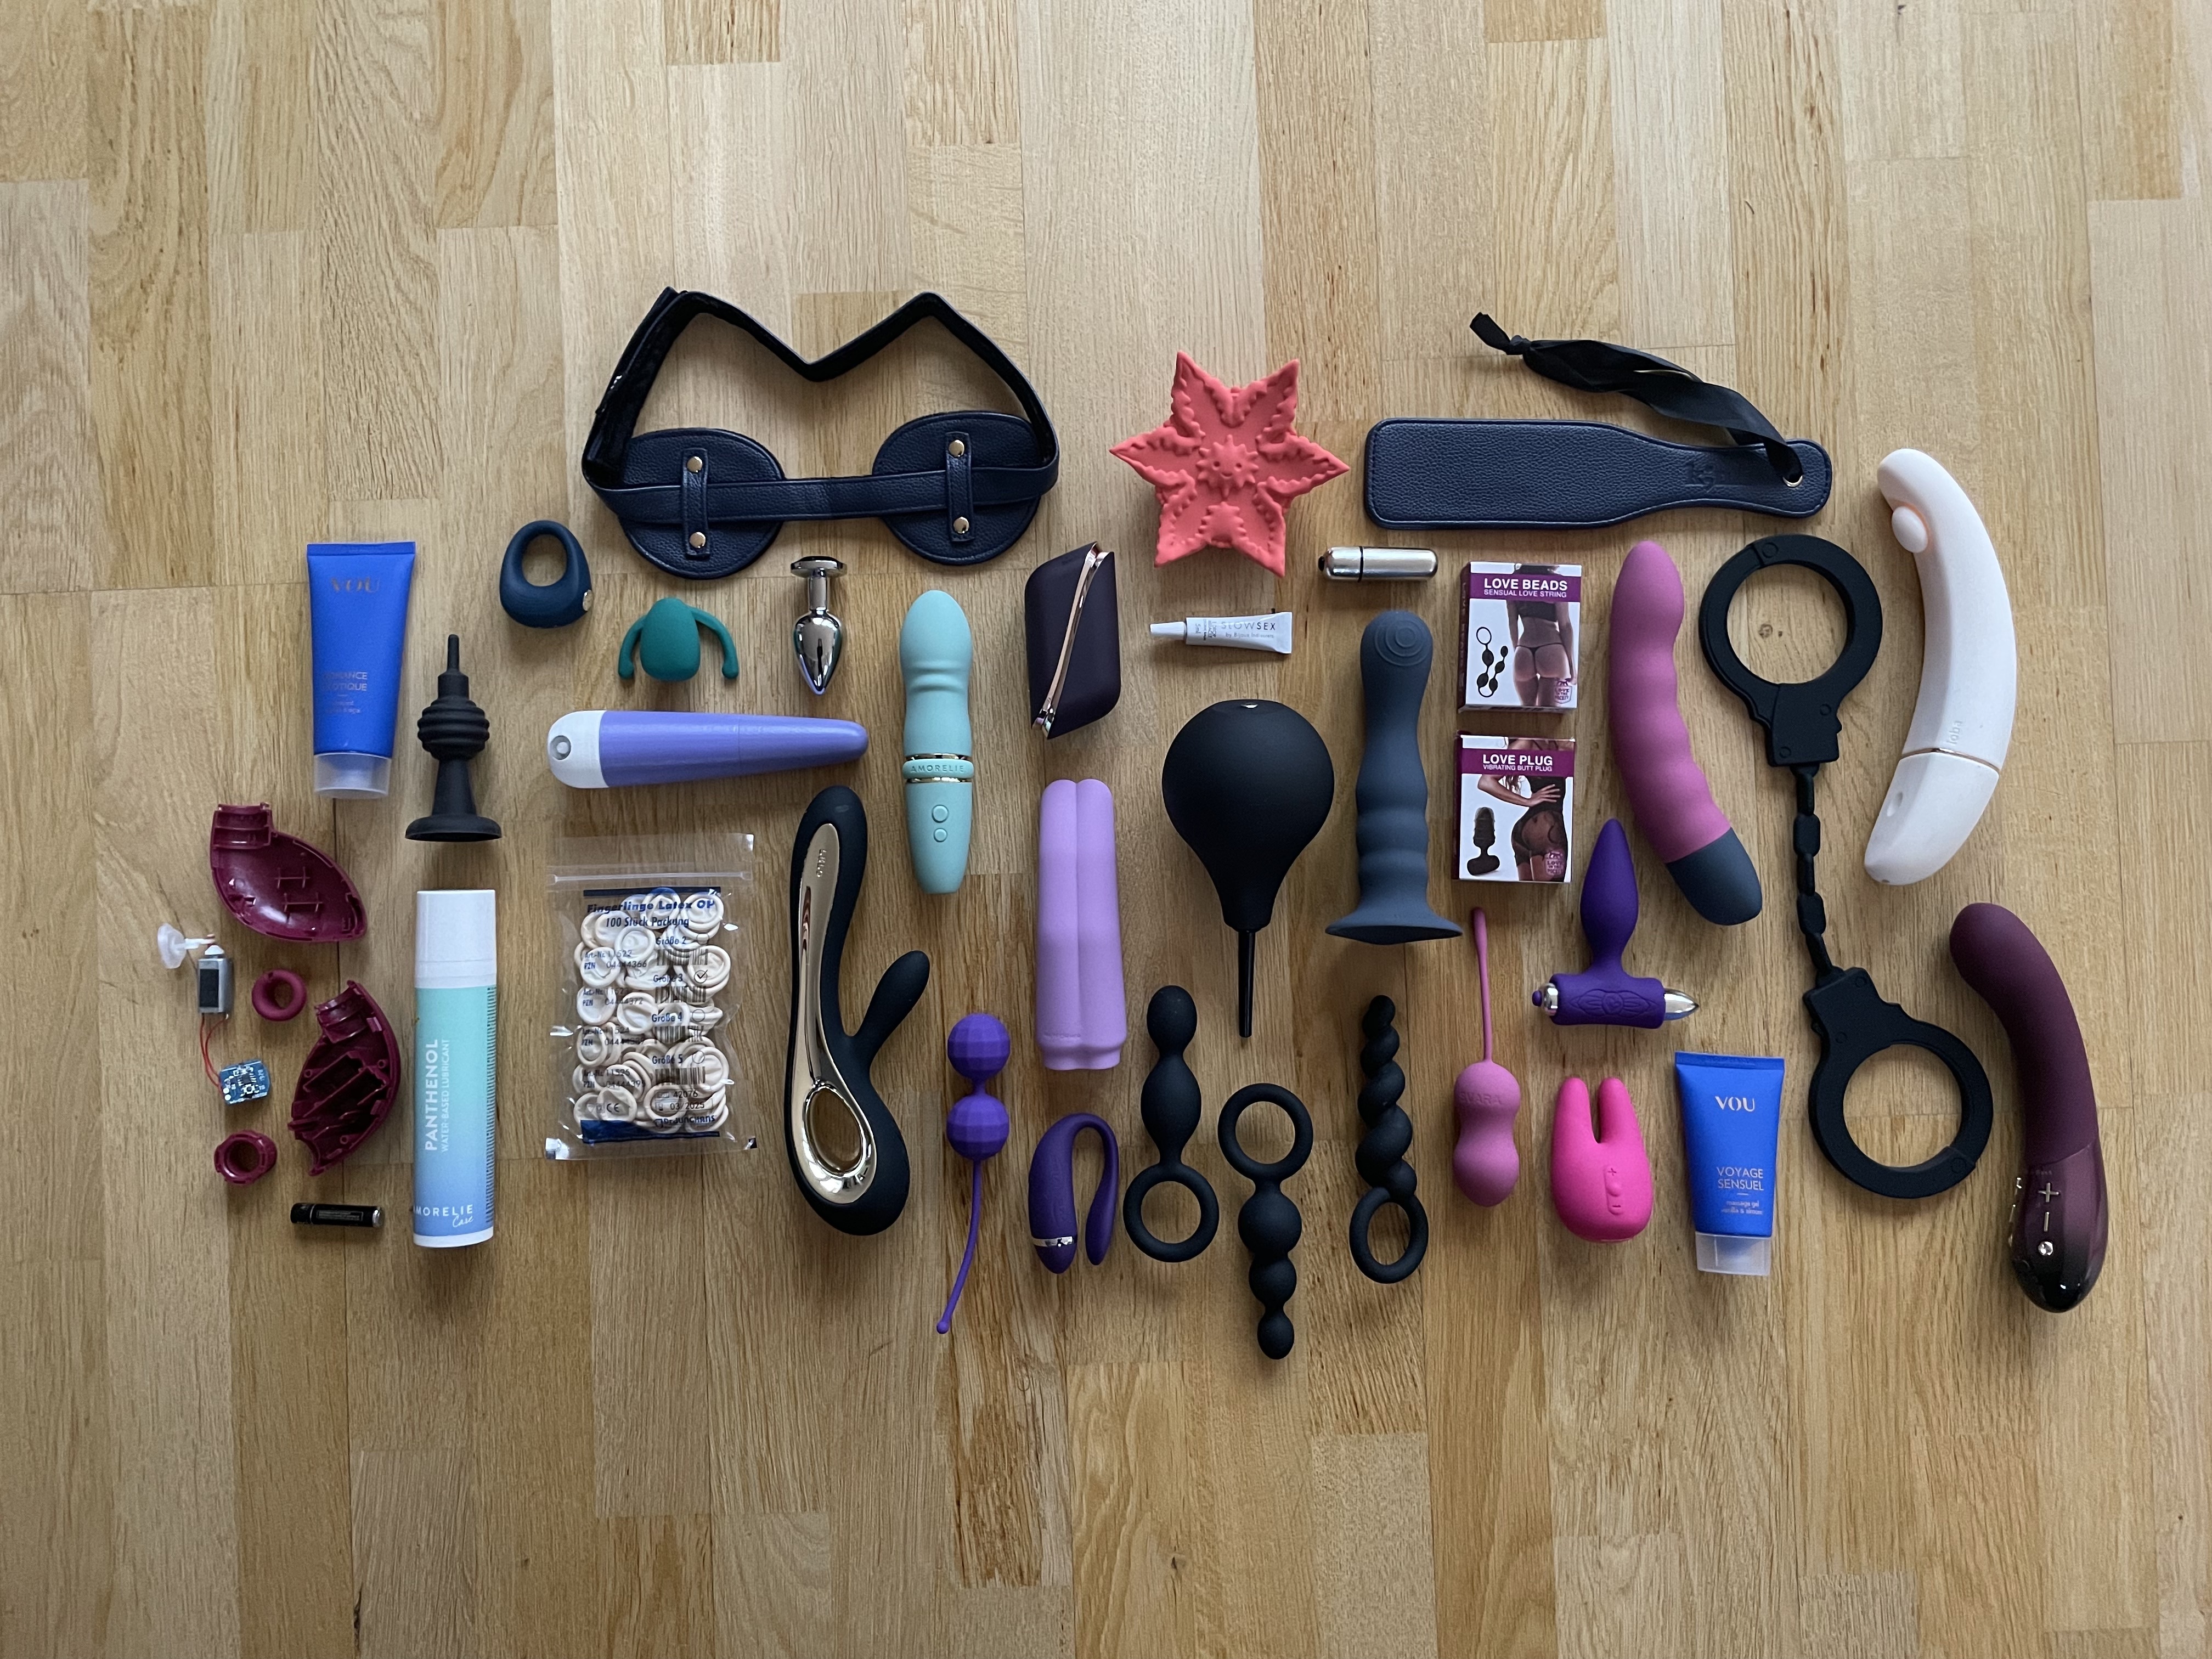 My sex toy collection as of January pic